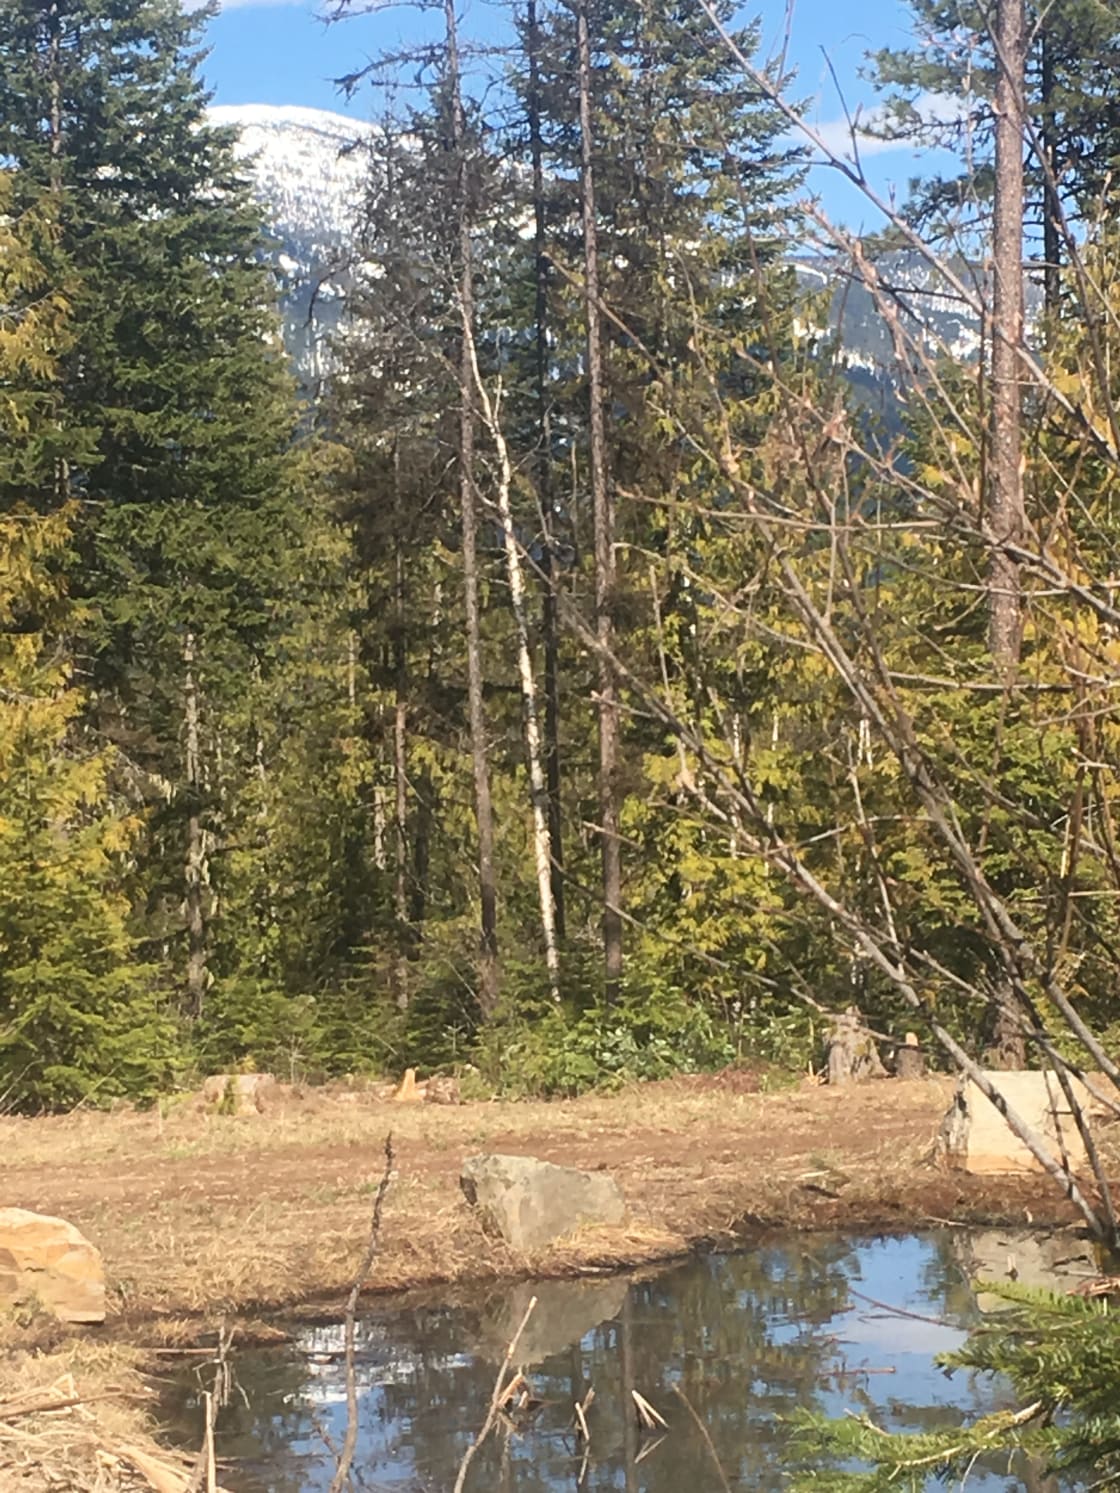 Our little pond frequently draws moose and other wildlife.